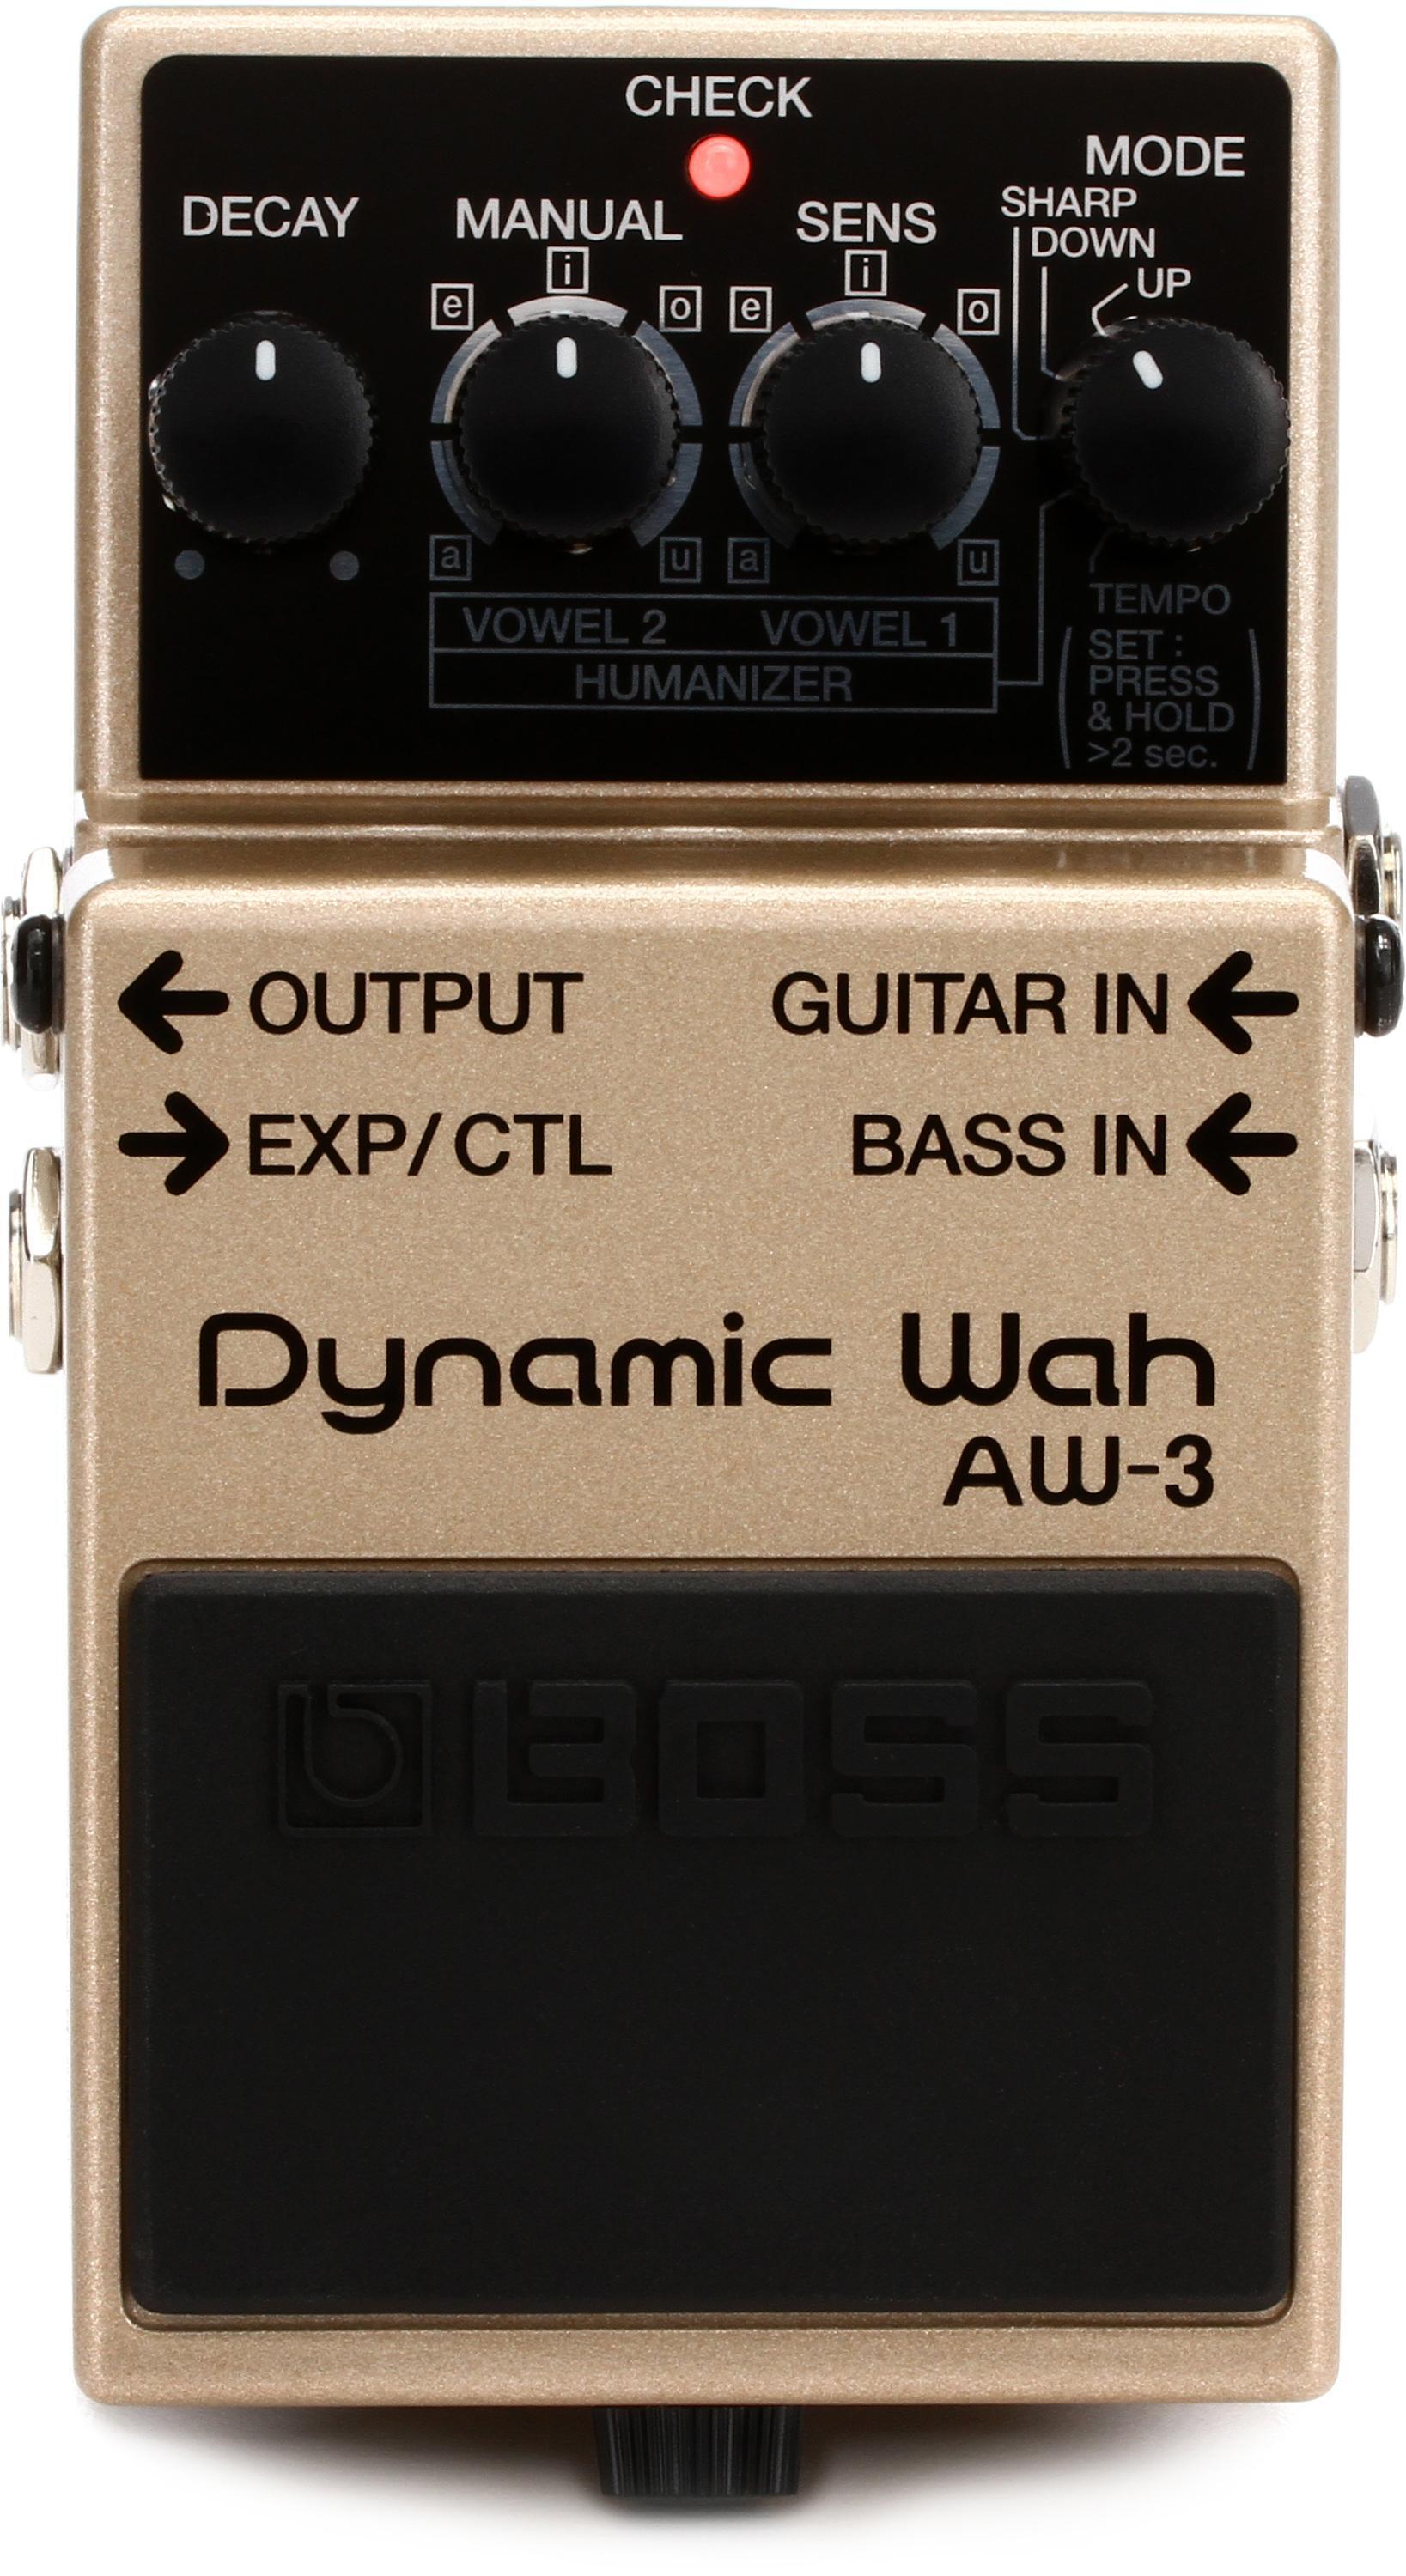 Pedal　Wah　Dynamic　AW-3　Boss　Sweetwater